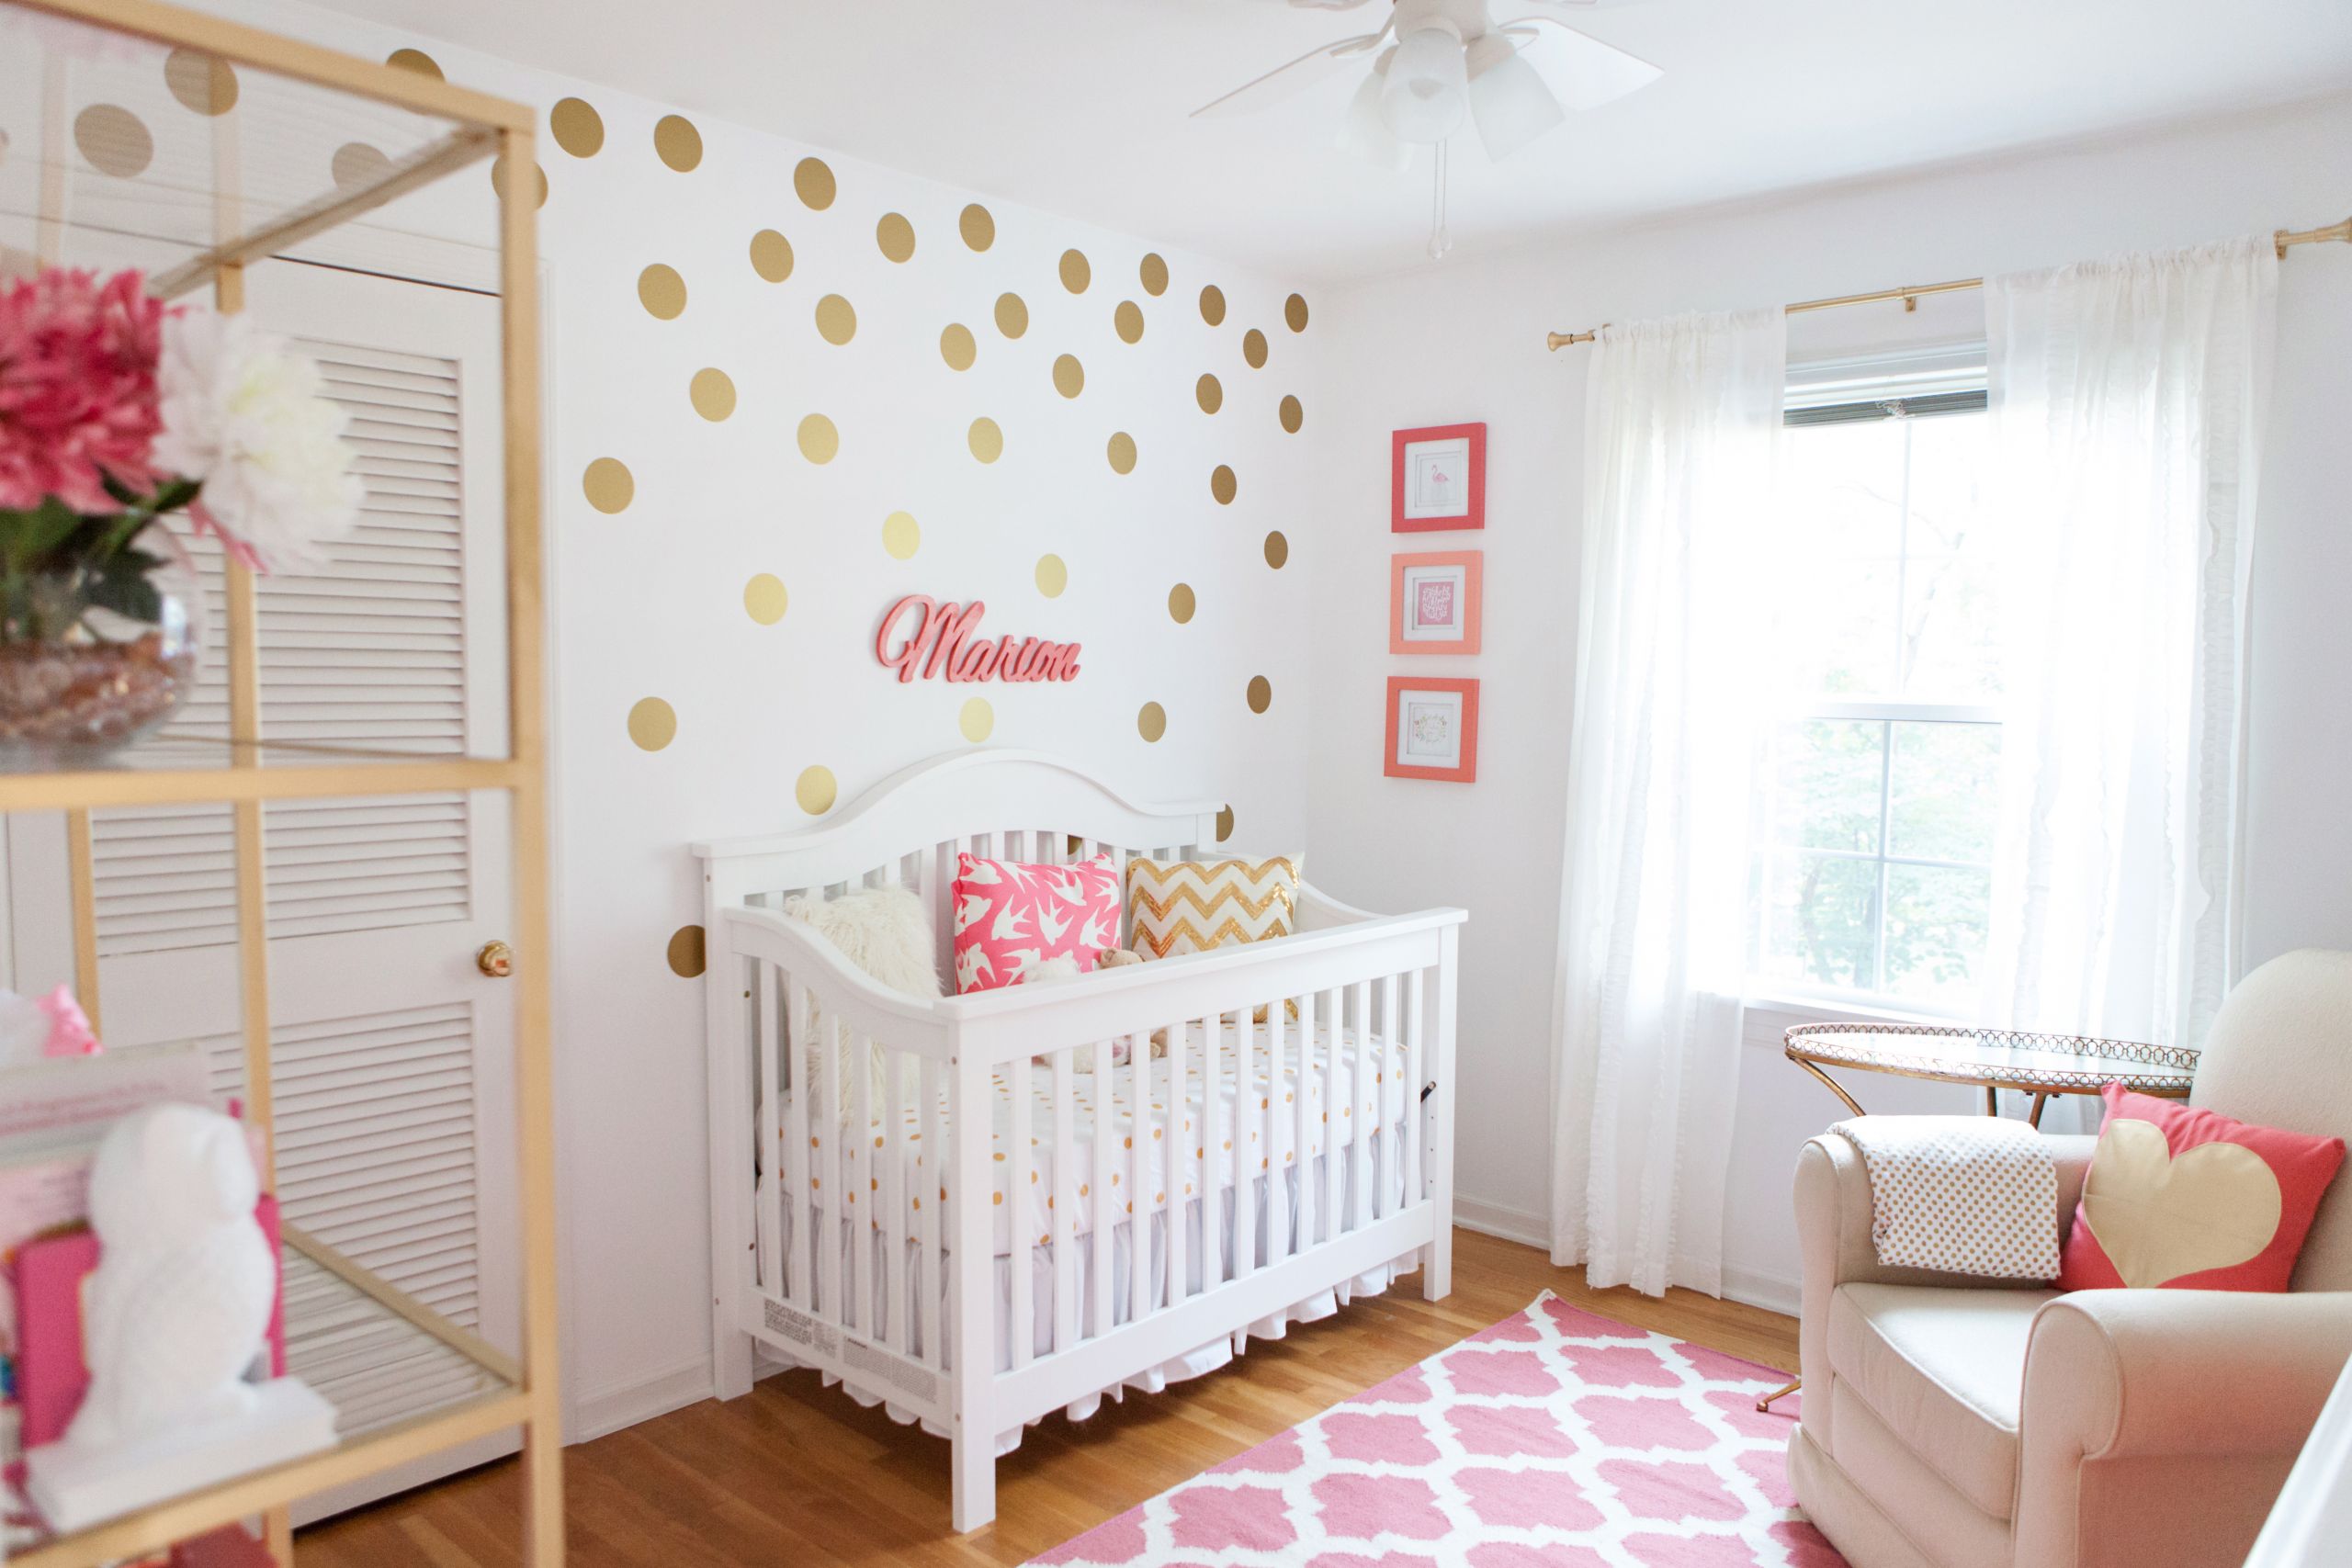 Baby Girl Bedroom Decoration
 Marion s Coral and Gold Polka Dot Nursery Project Nursery